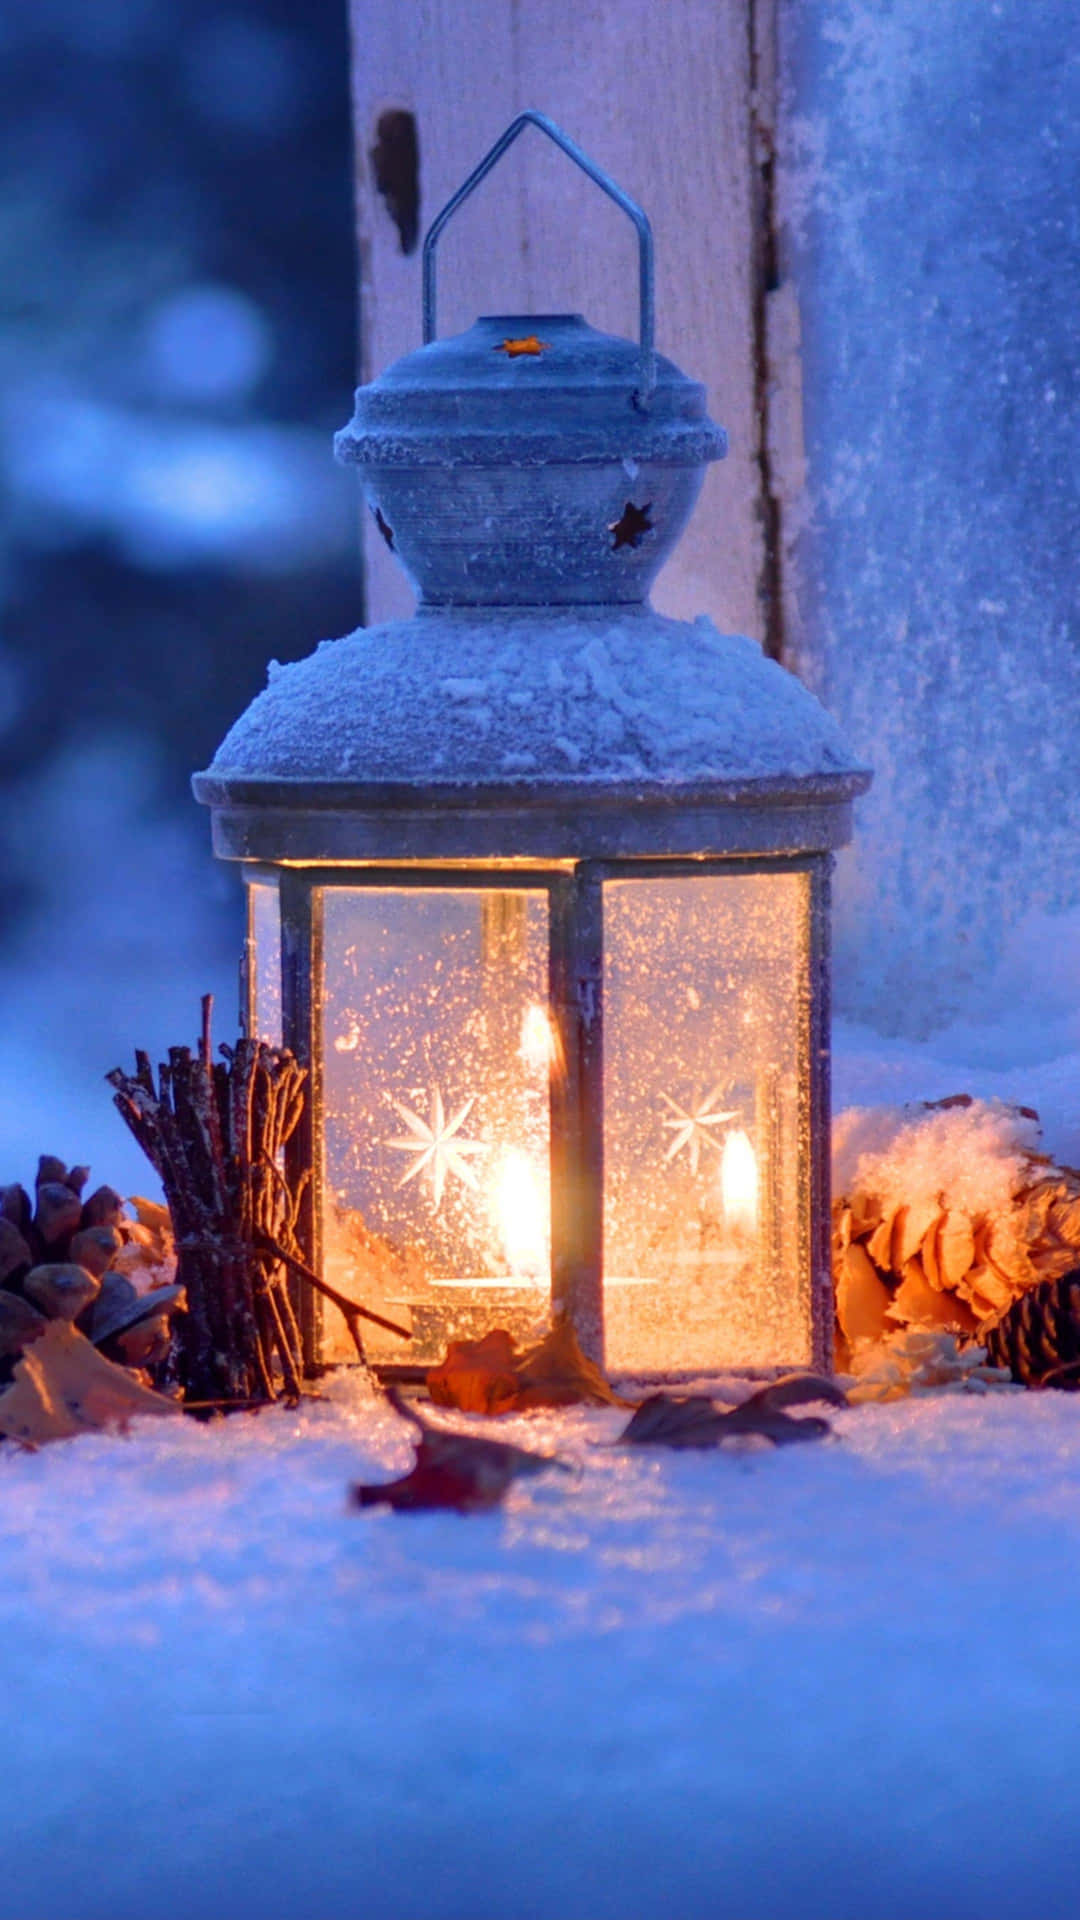 A Lantern Is Lit Up In The Snow Background